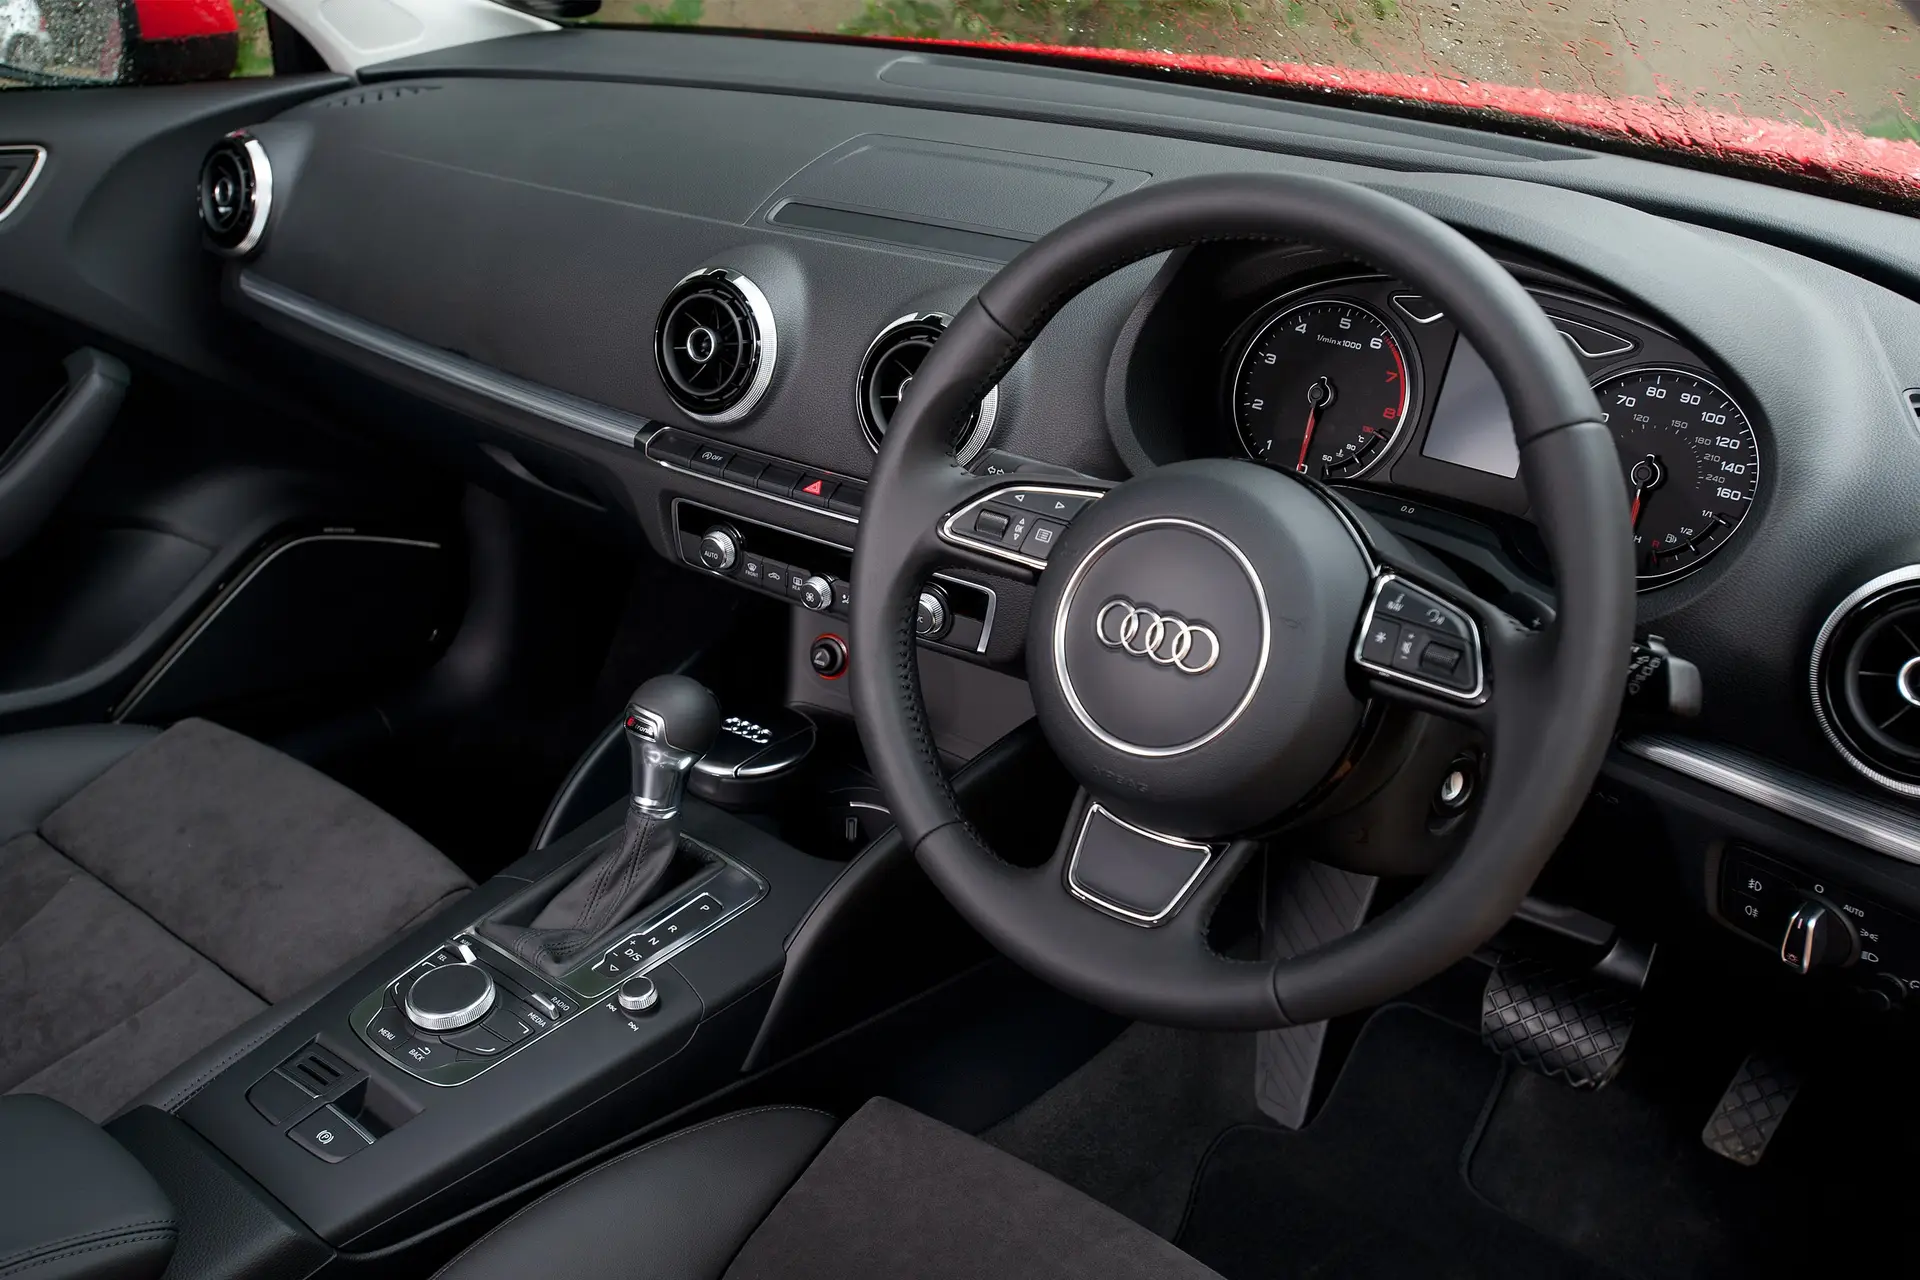 Audi A3 (2012-2020) Review: interior close up photo of the Audi A3 dashboard